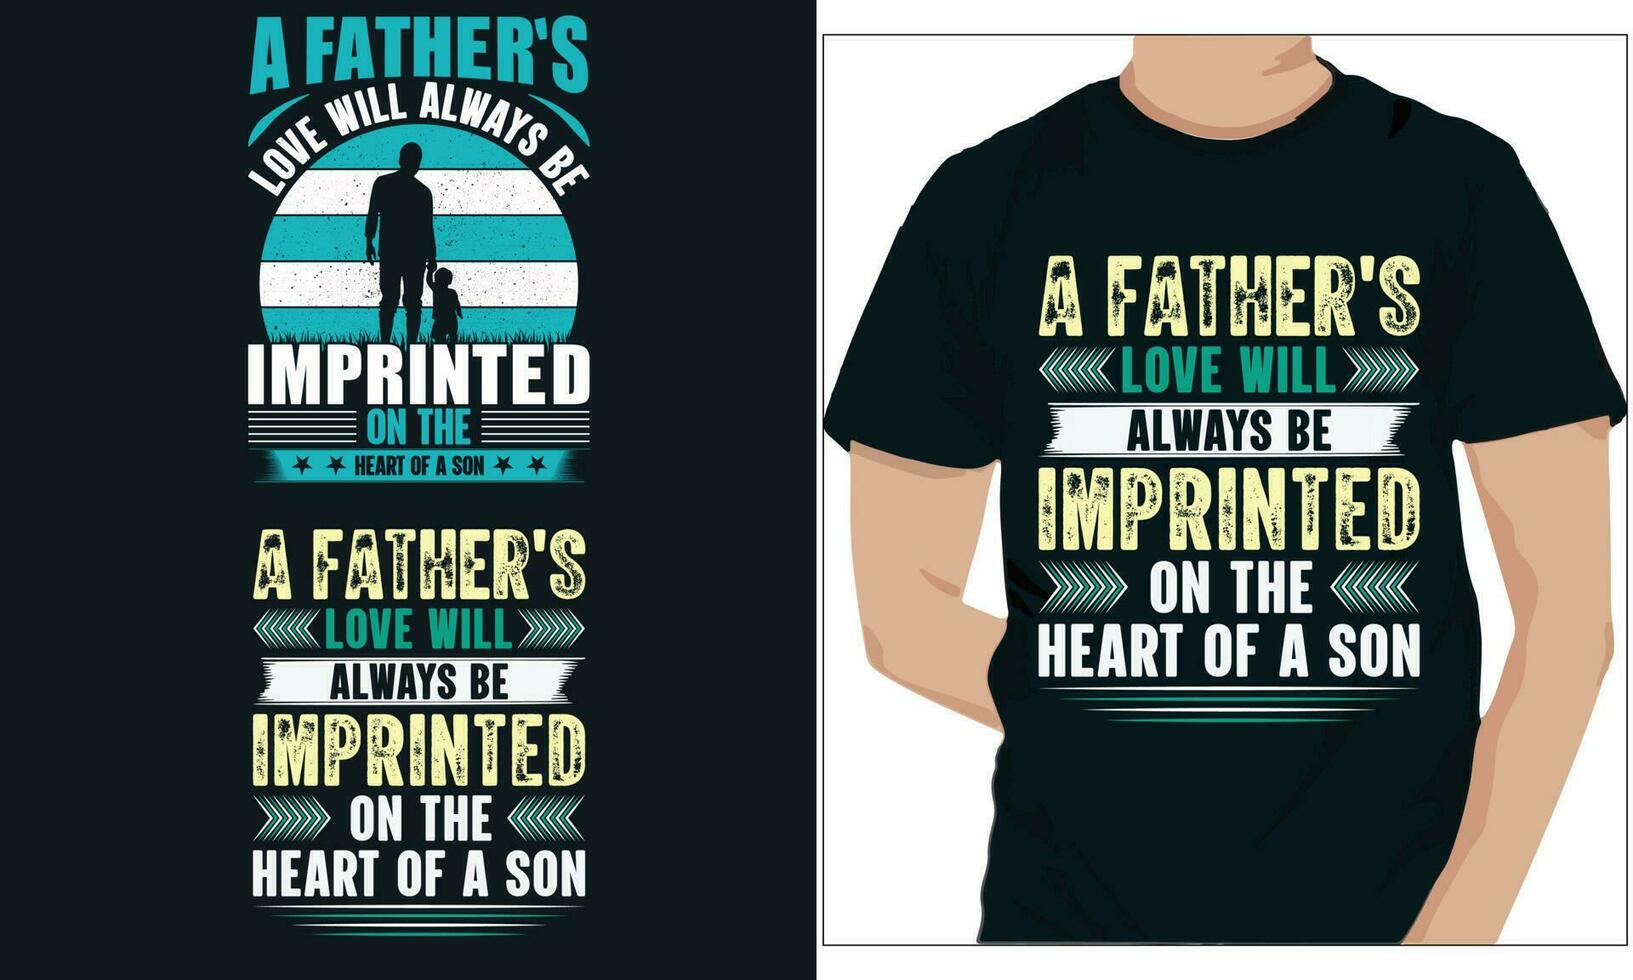 A FATHER S LOVE WILL ALWAYS BE IMPRINTED ON THE HEART OF A SON. FATHER DAY t-shirt design vector